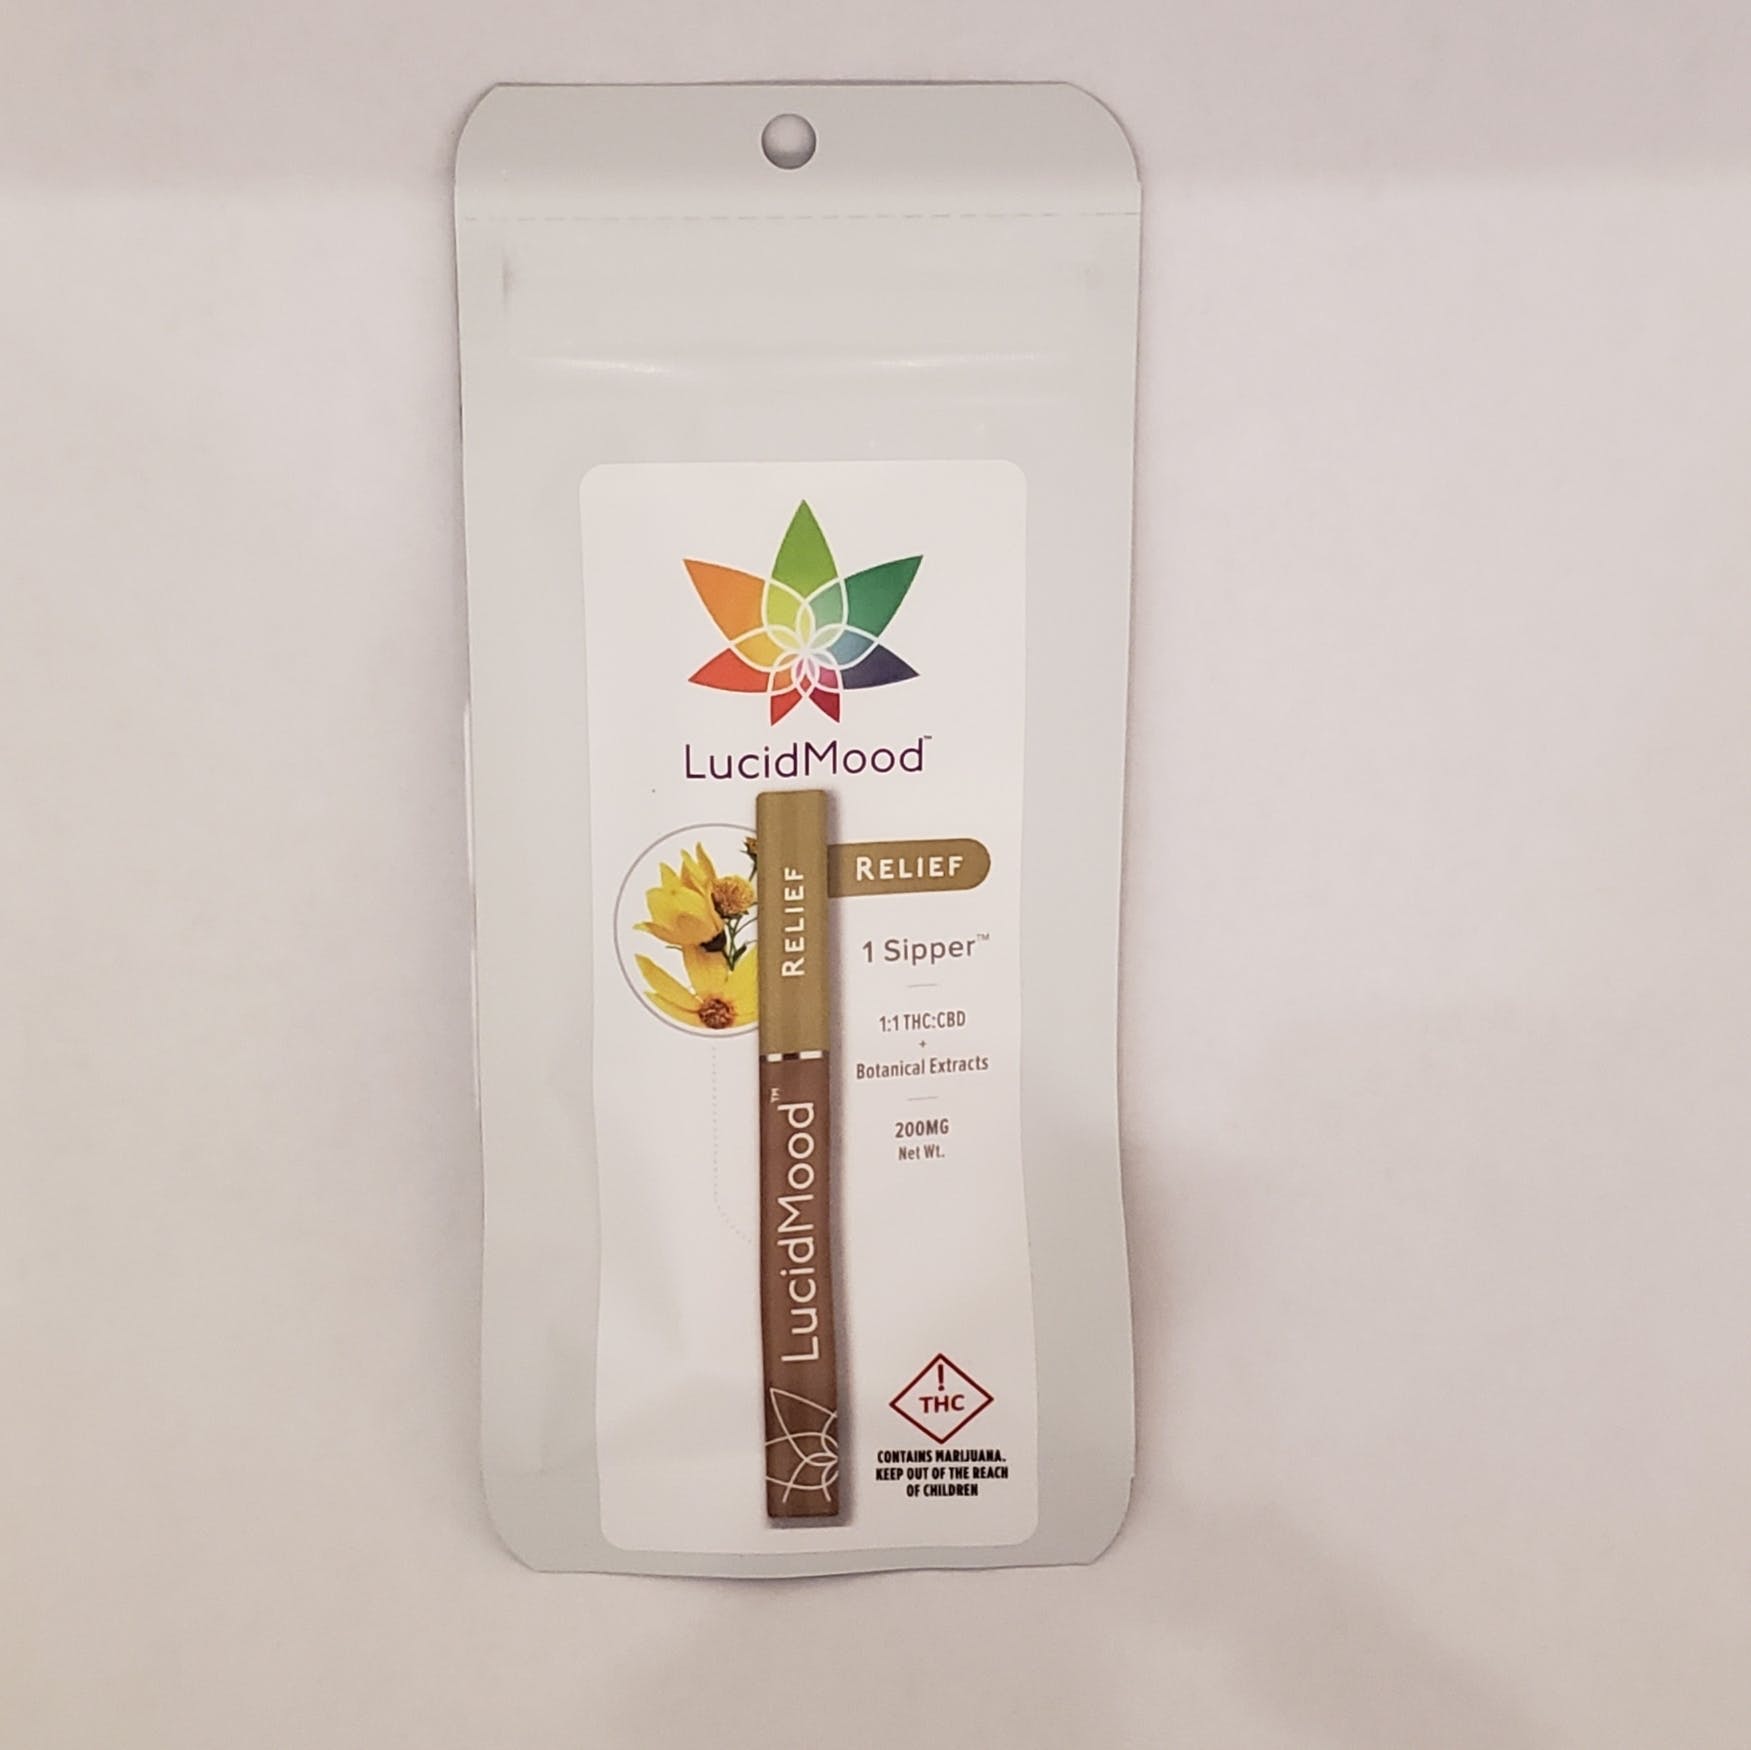 Kind Thera - LucidMood Relief 1:1 Sipper 200mg Disposable Vape